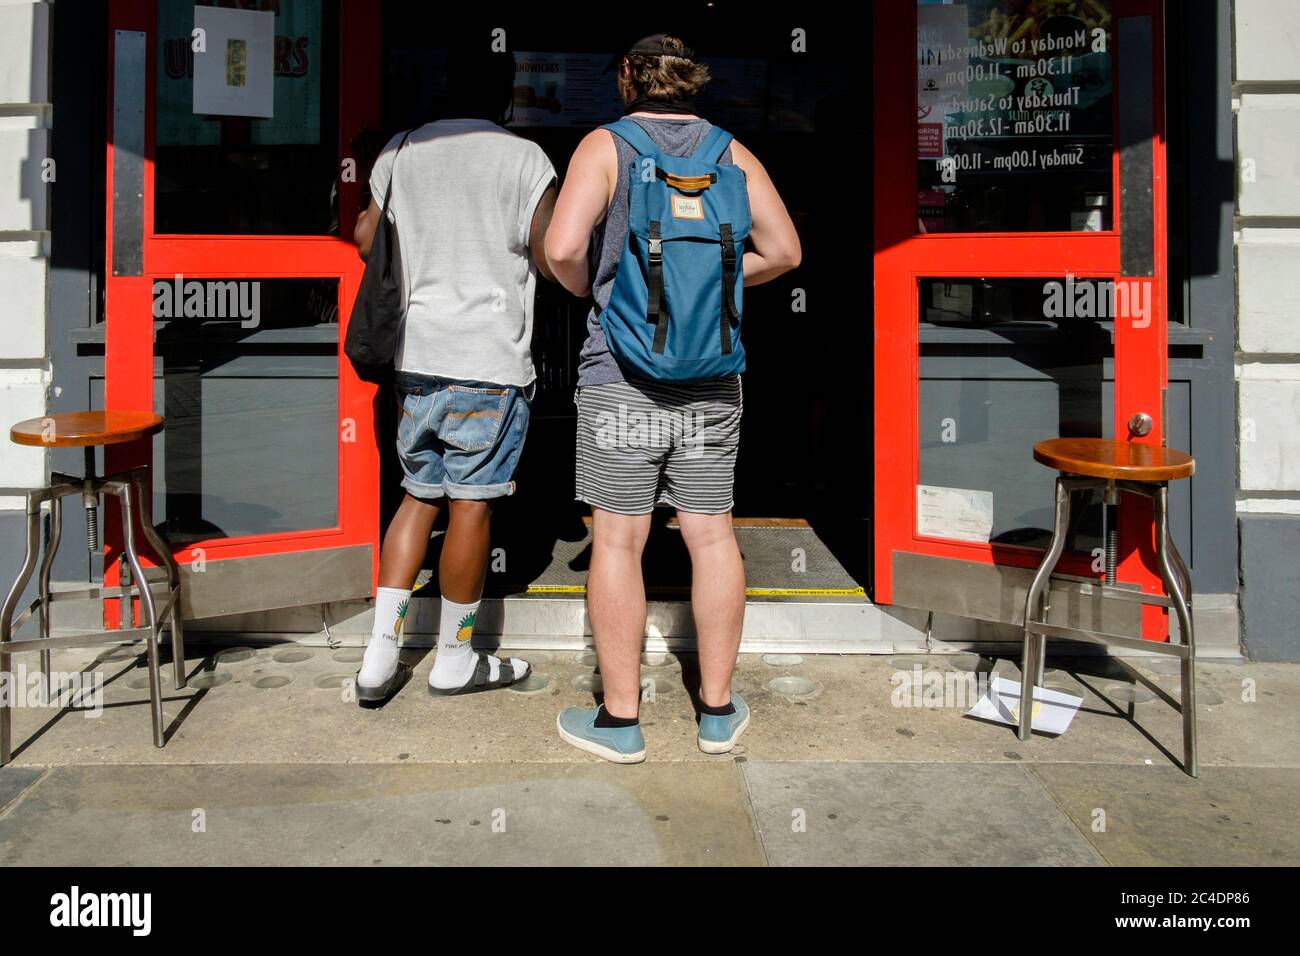 25th June 2020. Customers wait outside takeaway food outlet in central London. Stock Photo